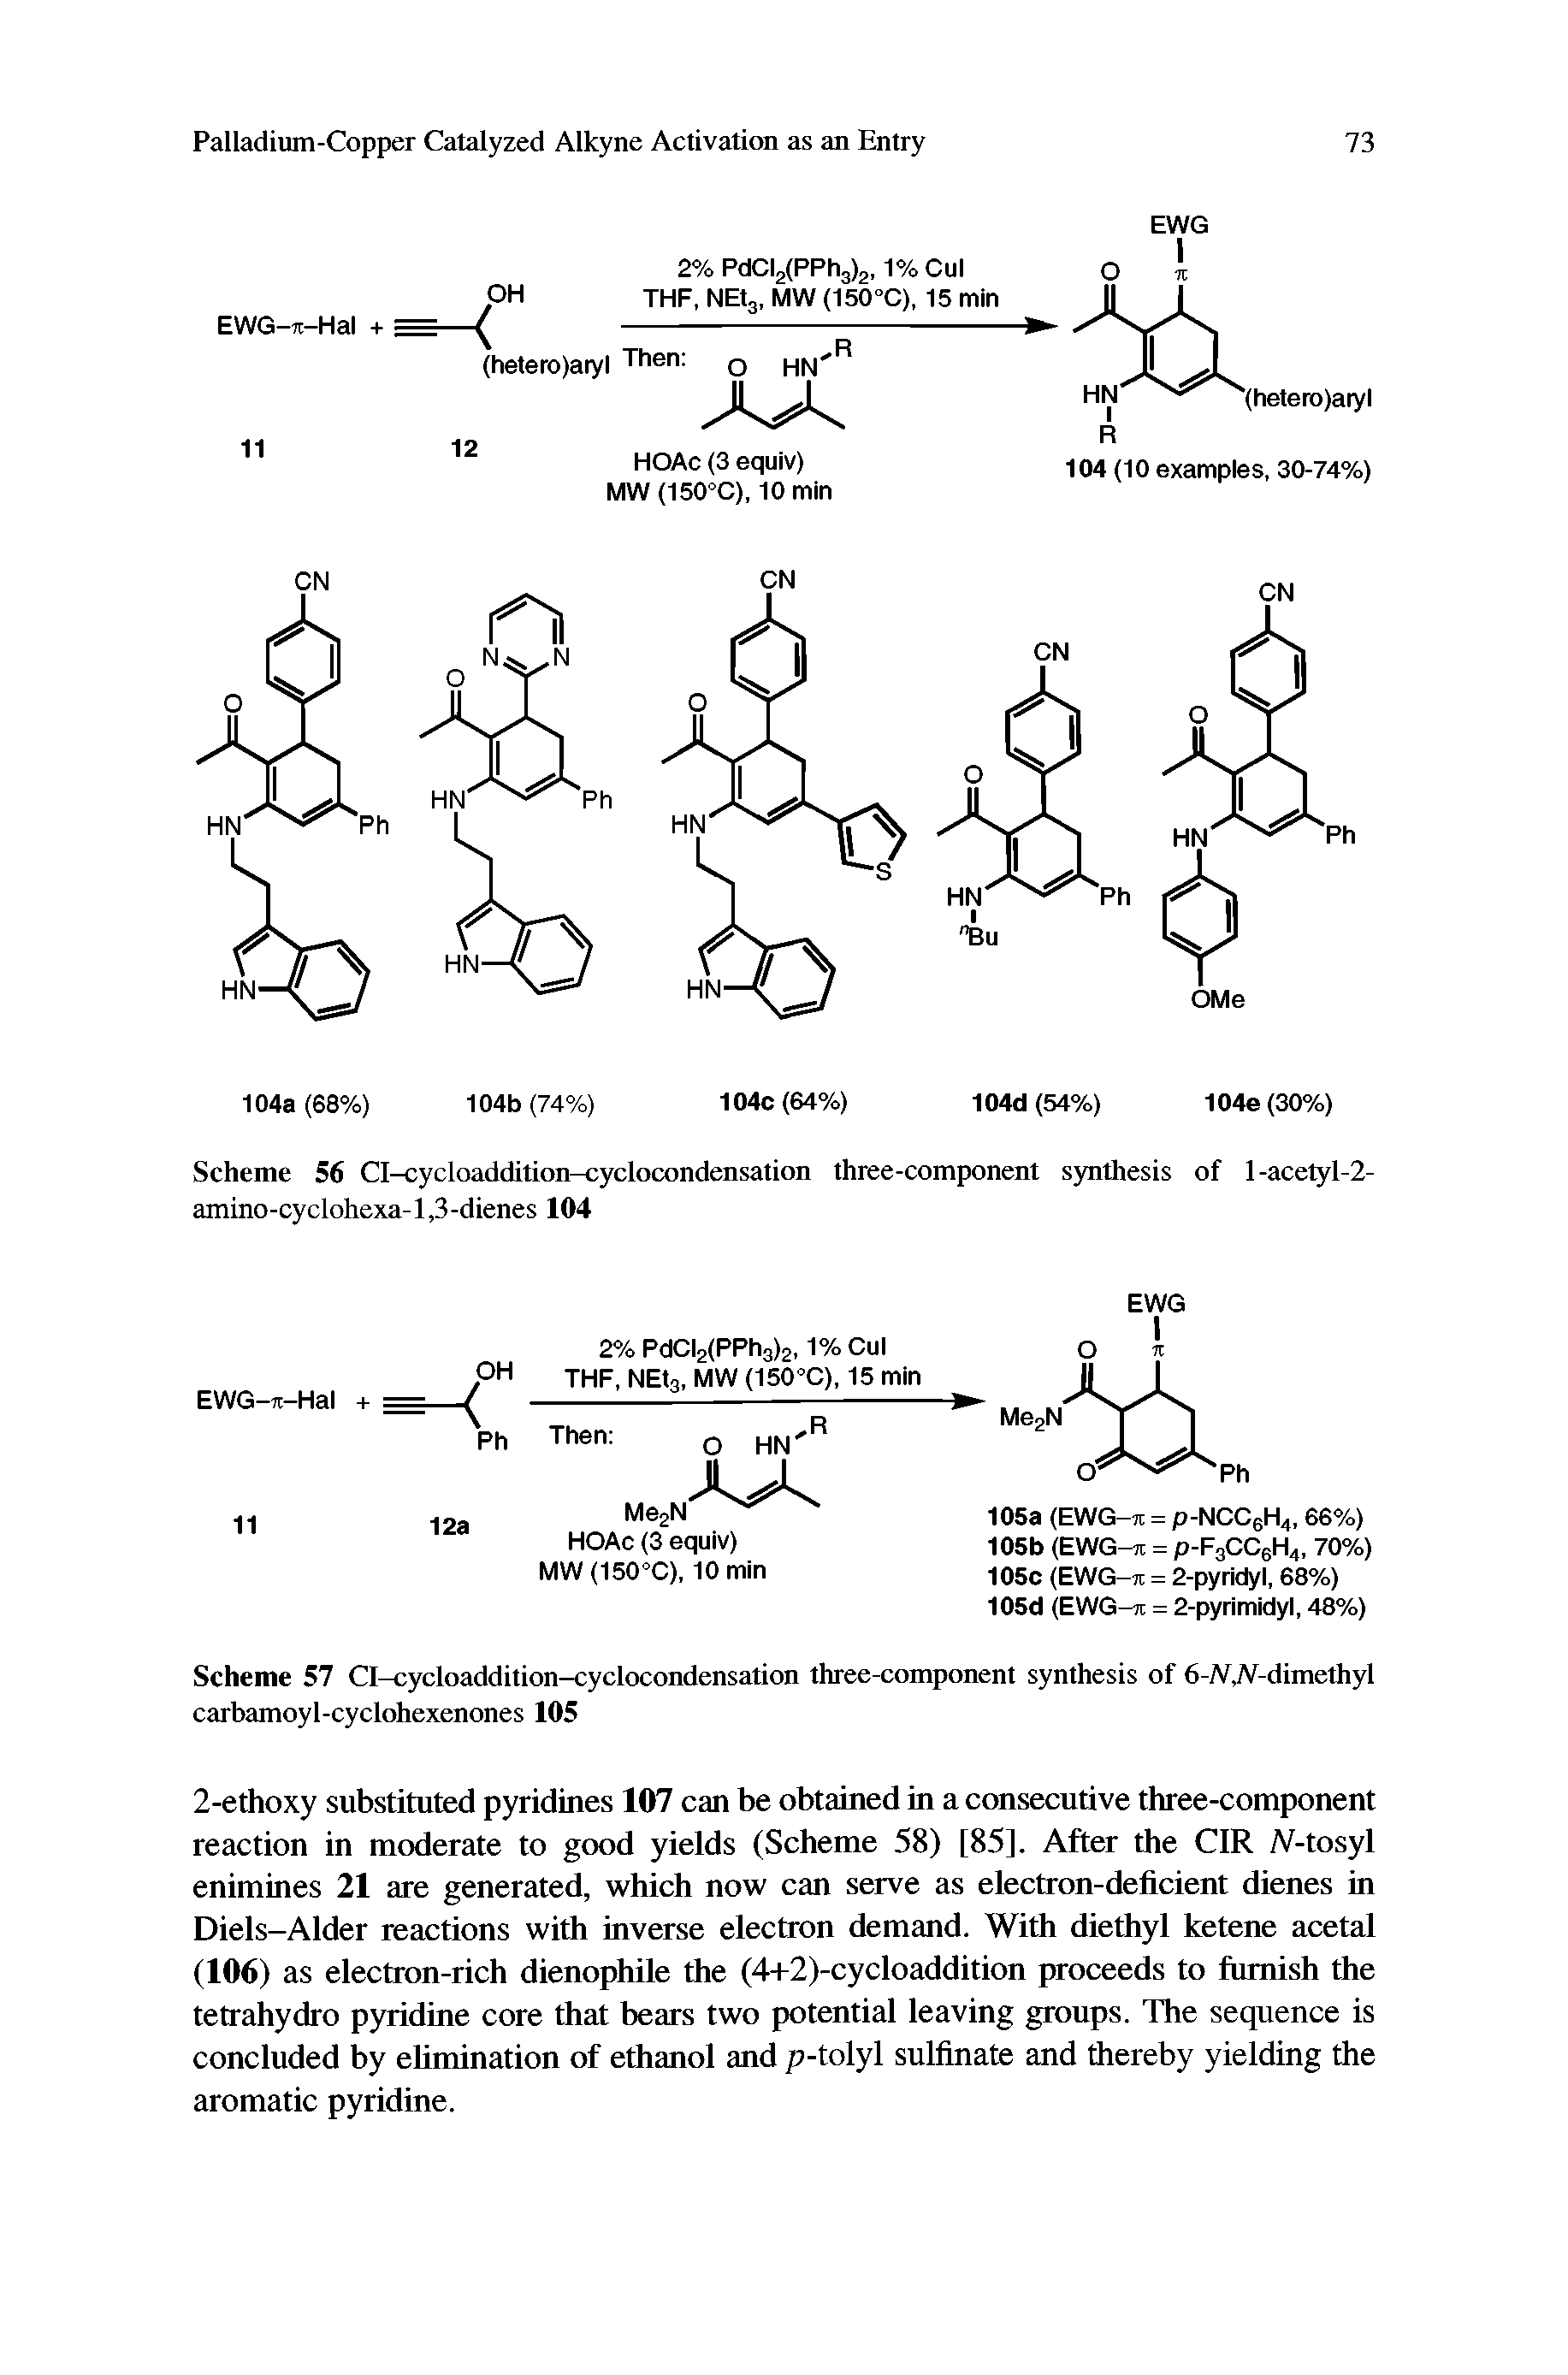 Scheme 56 Cl-cycloaddition-cyclocondensation three-component synthesis of l-acetyl-2-amino-cyclohexa-l,3-dienes 104...